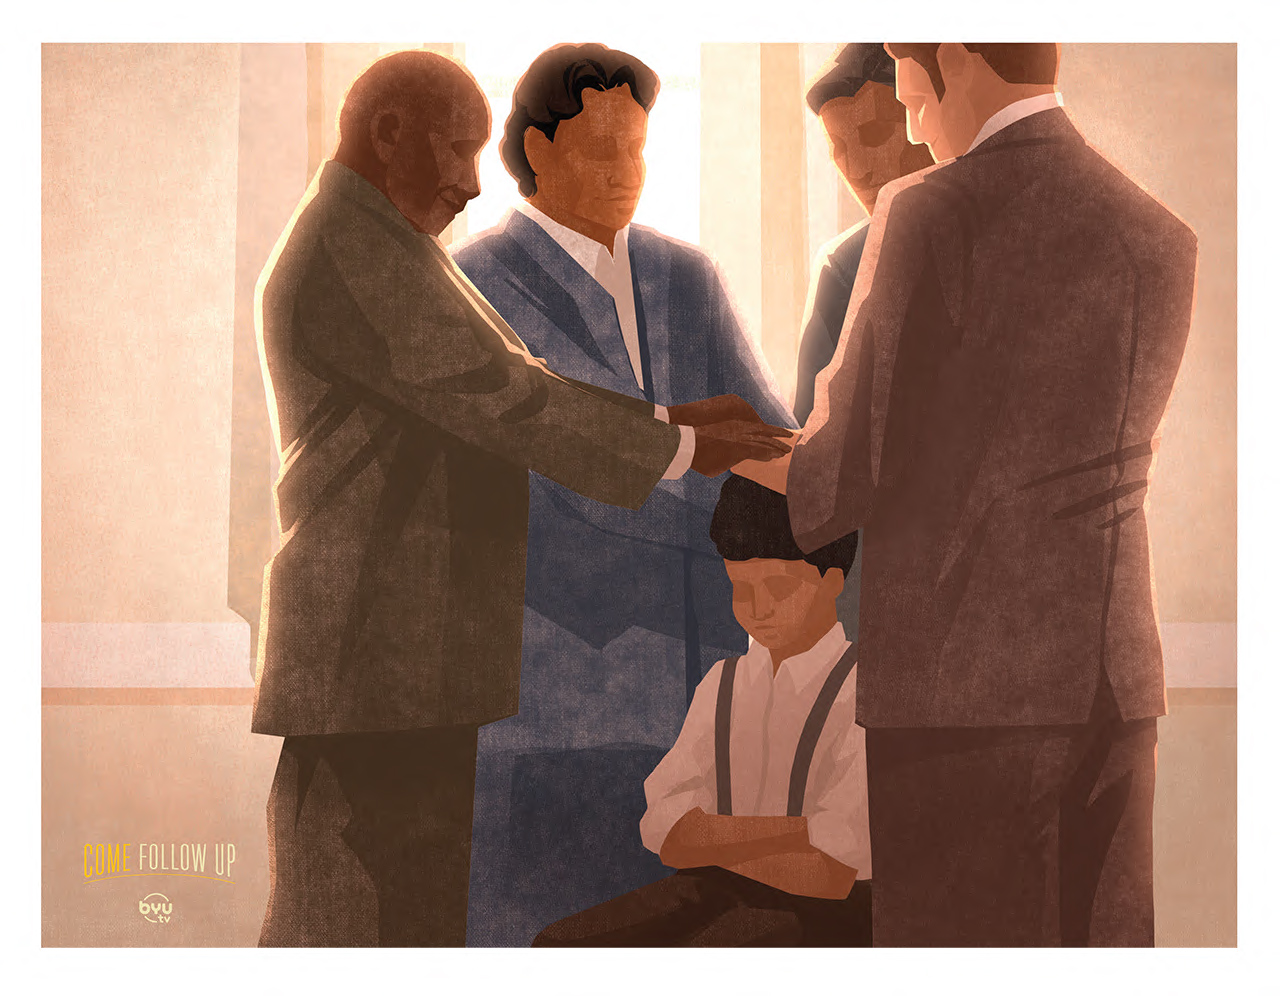 Stylized illustration of four men laying their hands on the head of a young boy